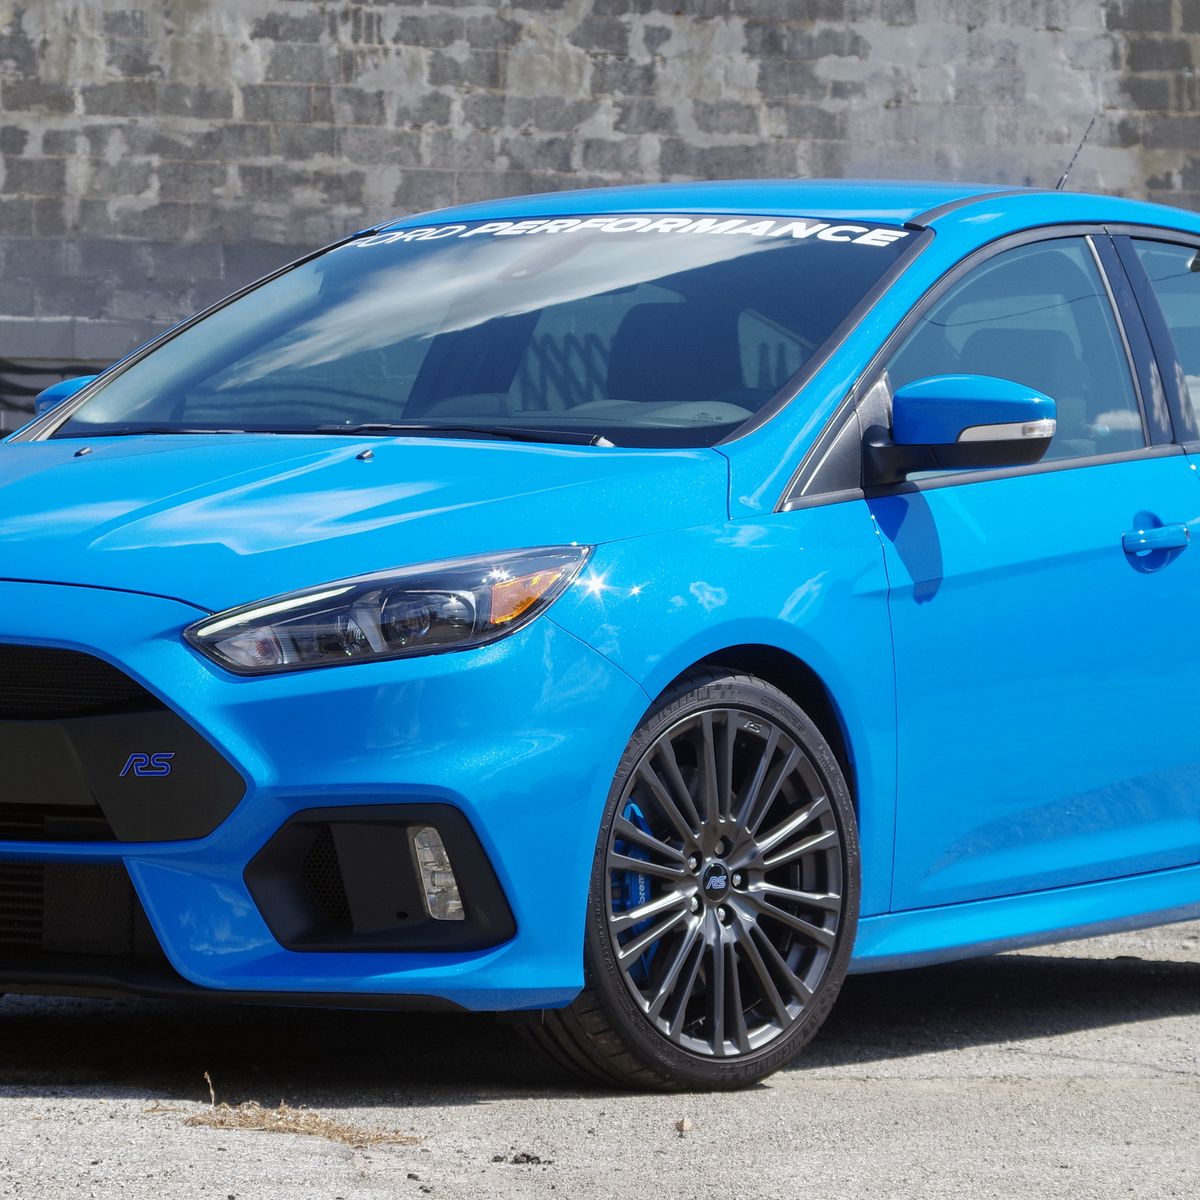 Ford Focus Review, Specs, Power, and Price 